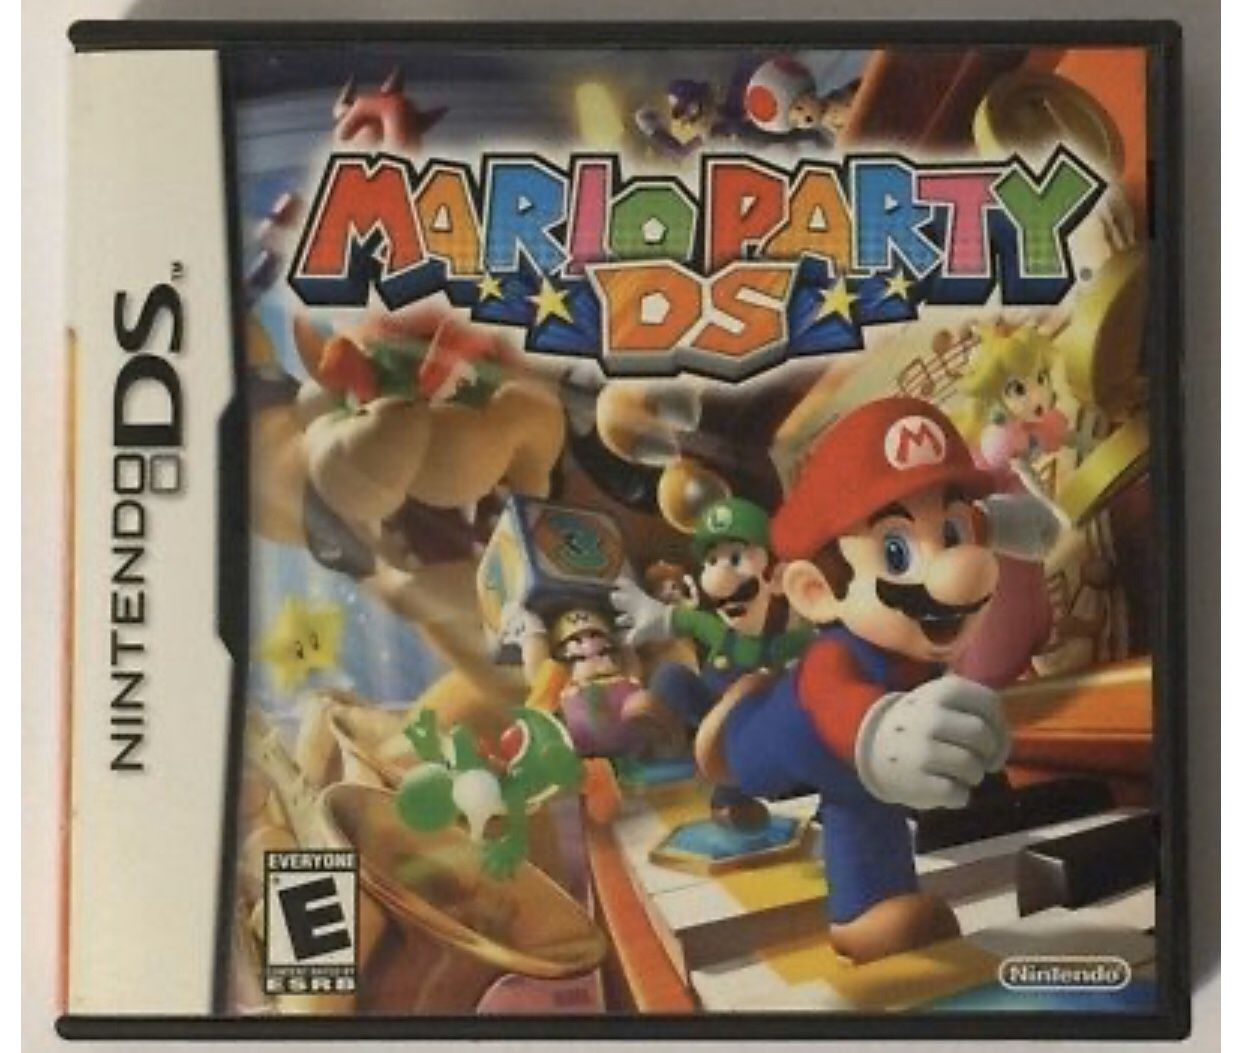 Nintendo DS Mario Party DS Case Artwork Manual Inserts NO GAME